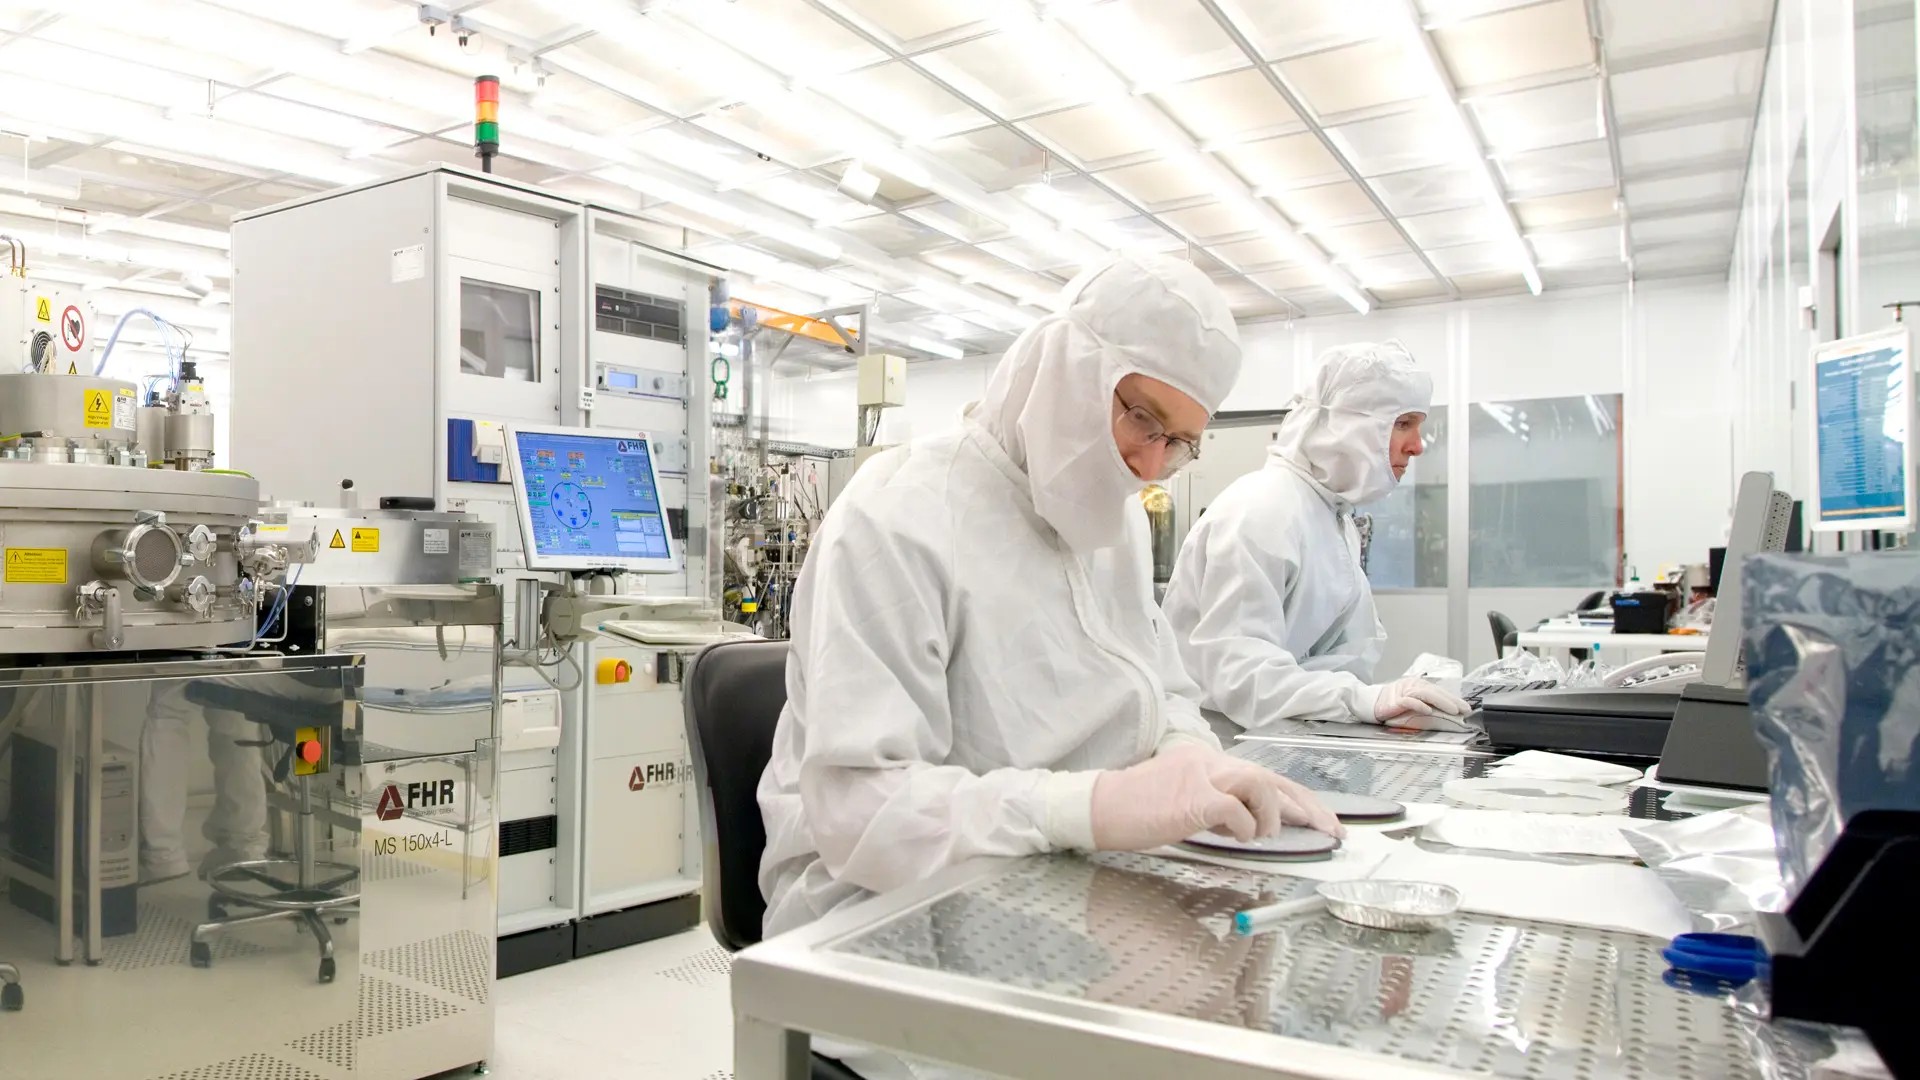 Researchers inside the cleanroom.